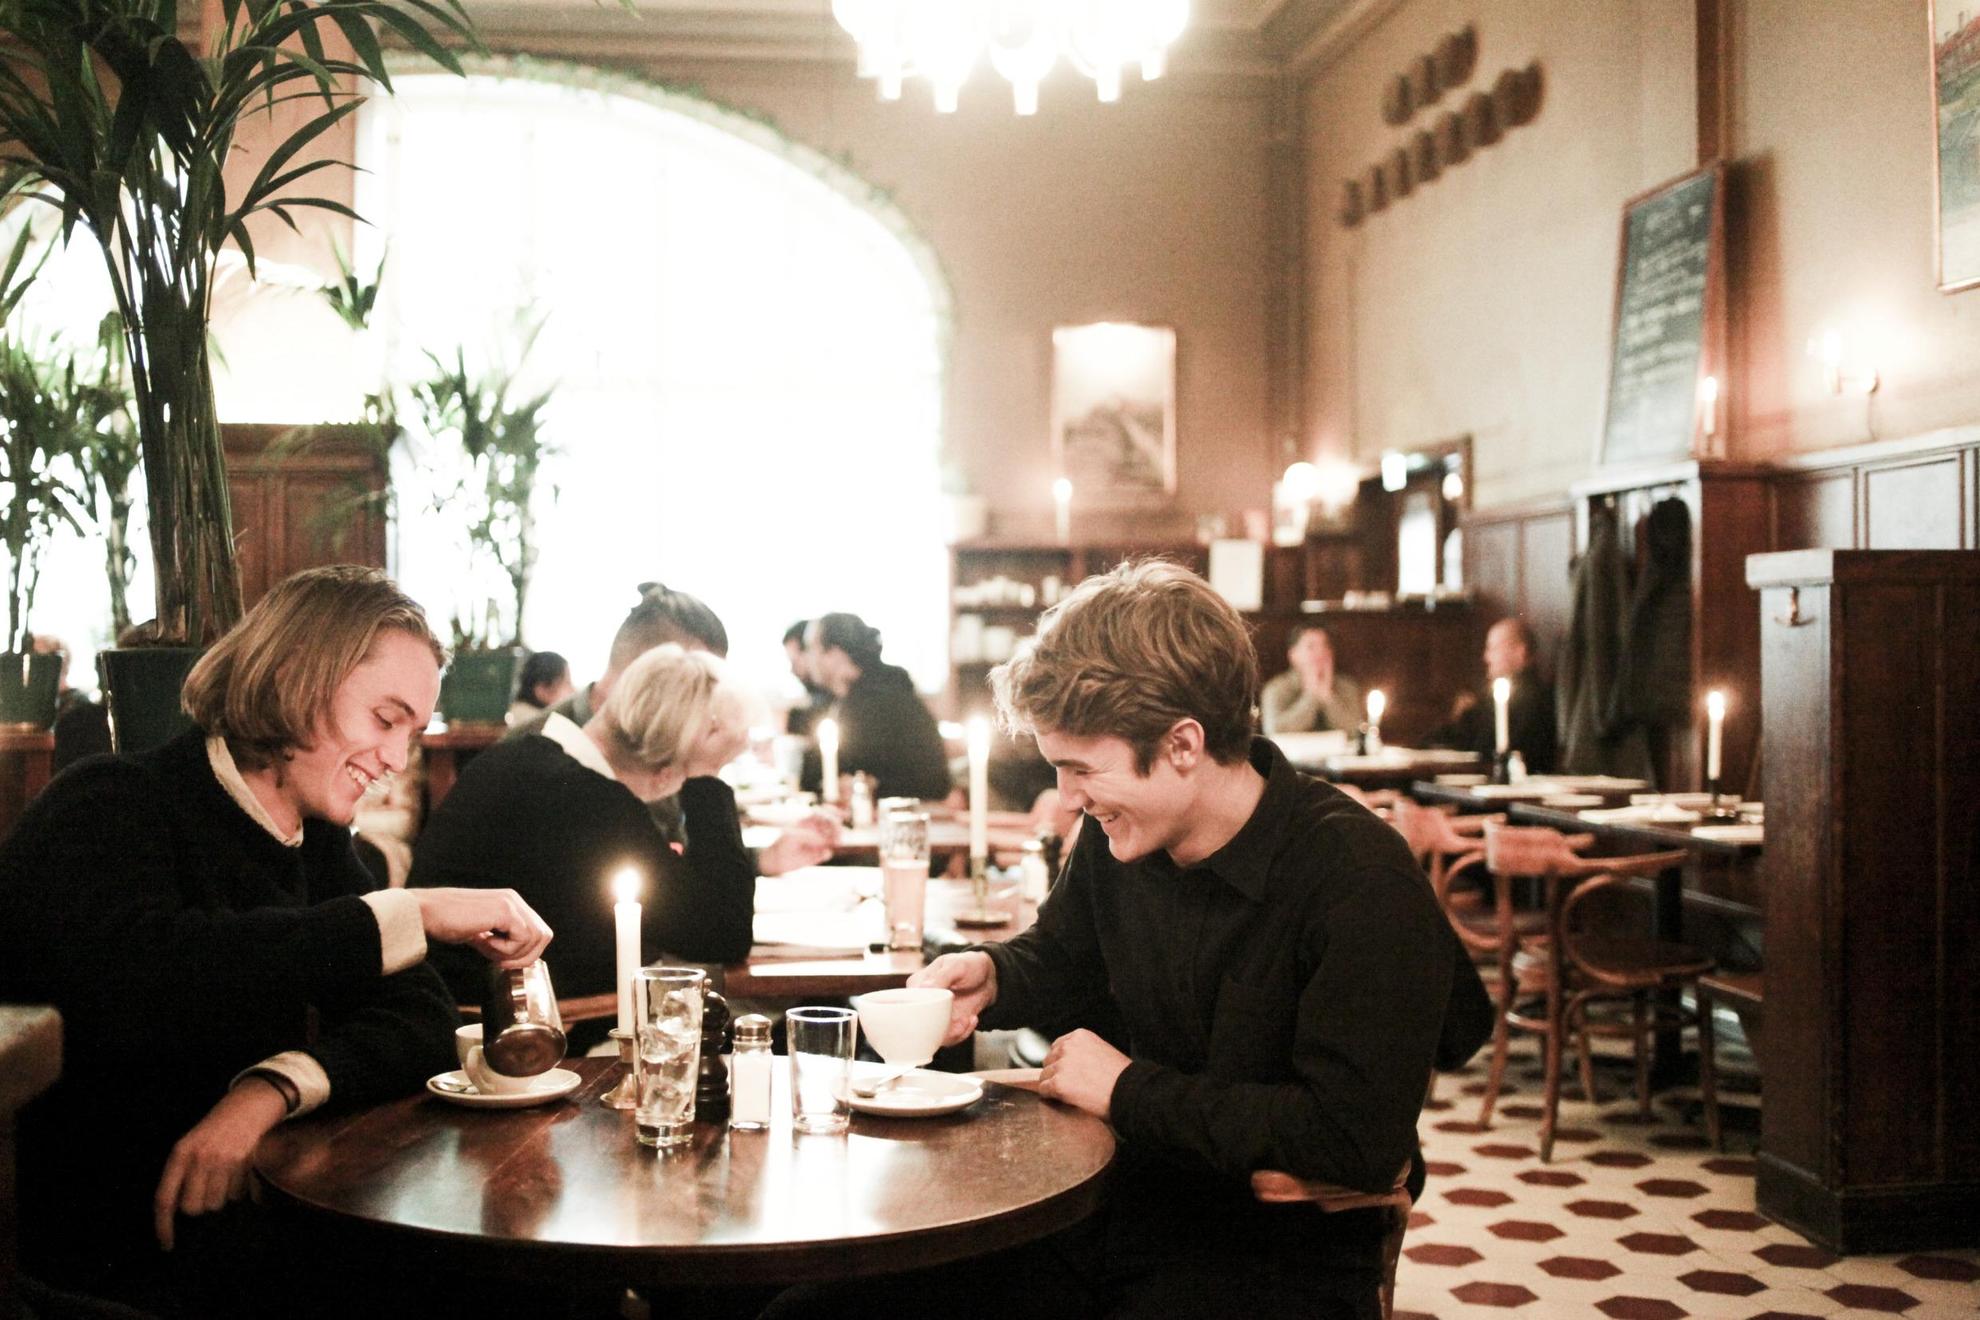 A restaurant setting in Stockholm, where two people in the foreground are enjoying their after-dinner coffee.